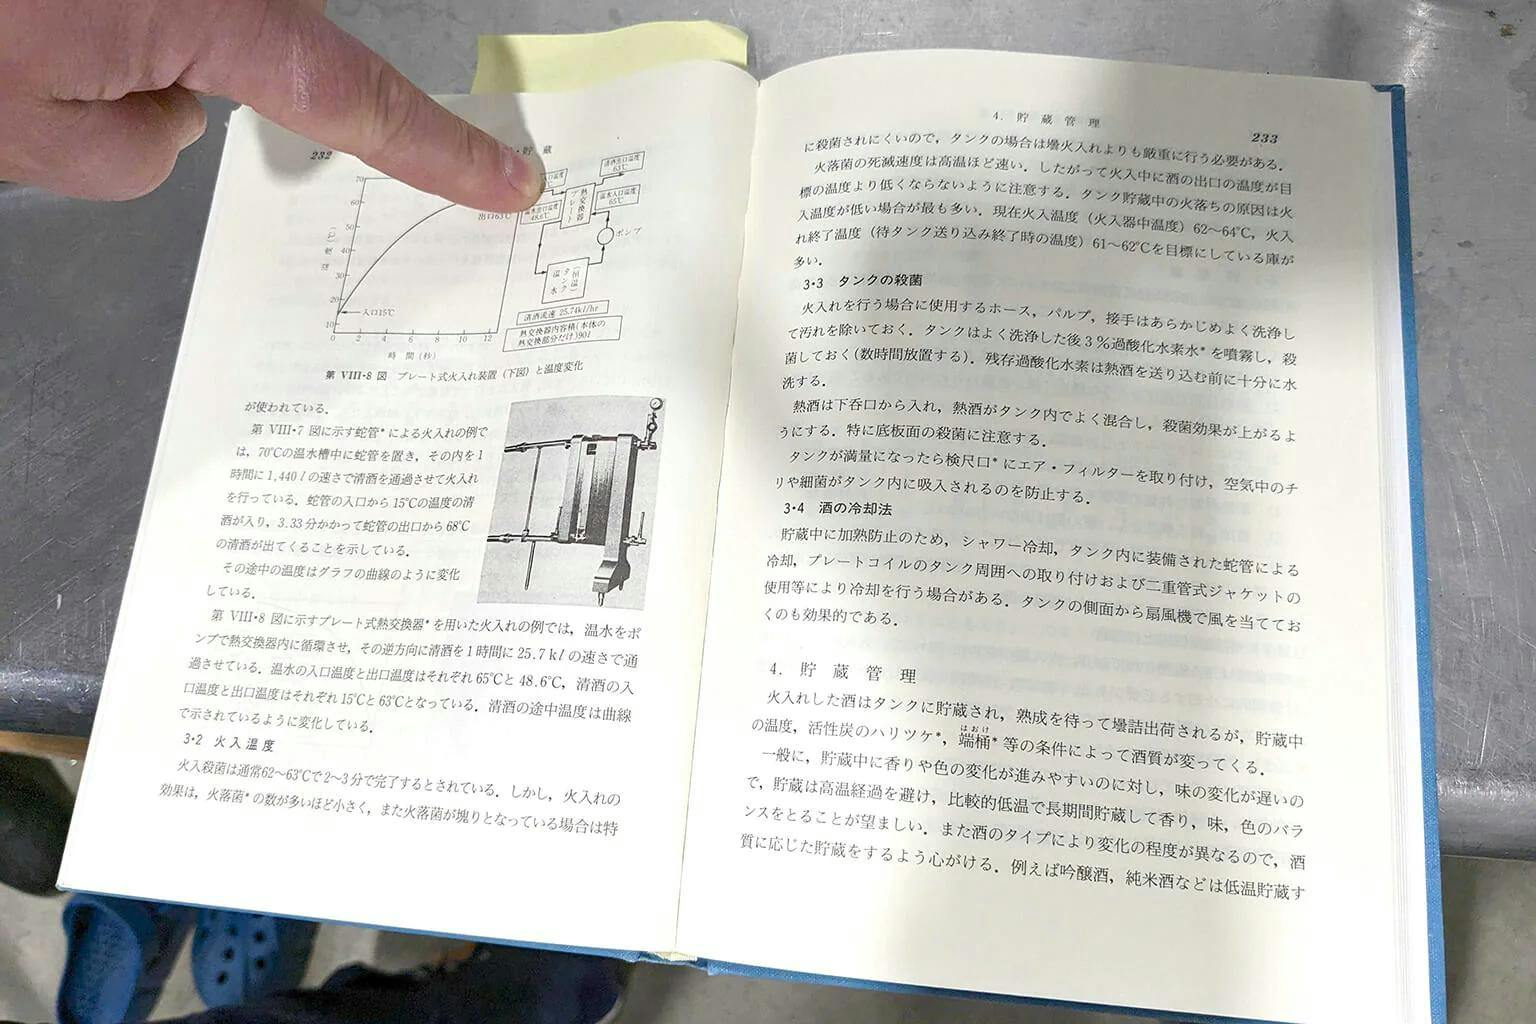 Bellomy points to a diagram in one of his Japanese technical books on sake brewing. | Photo by Sachiko Miyagi.